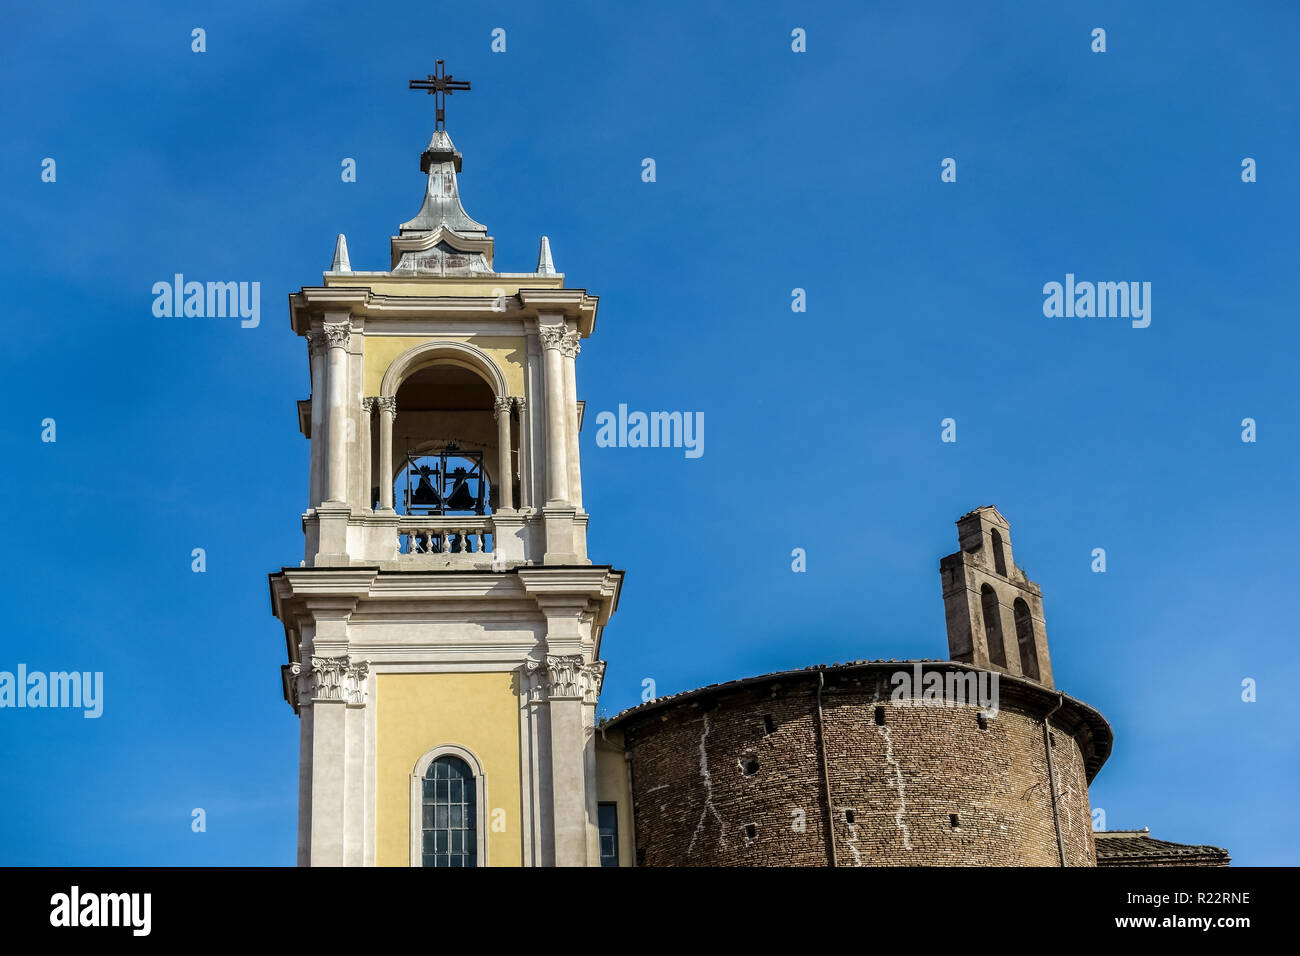 Santa Maria Delle Grazie Alle Fornaci, Italy. Bell tower. Sait Mary of Graces Church. Rome, Italy, Europe, EU. Blue sky, low angle view, pov. Stock Photo